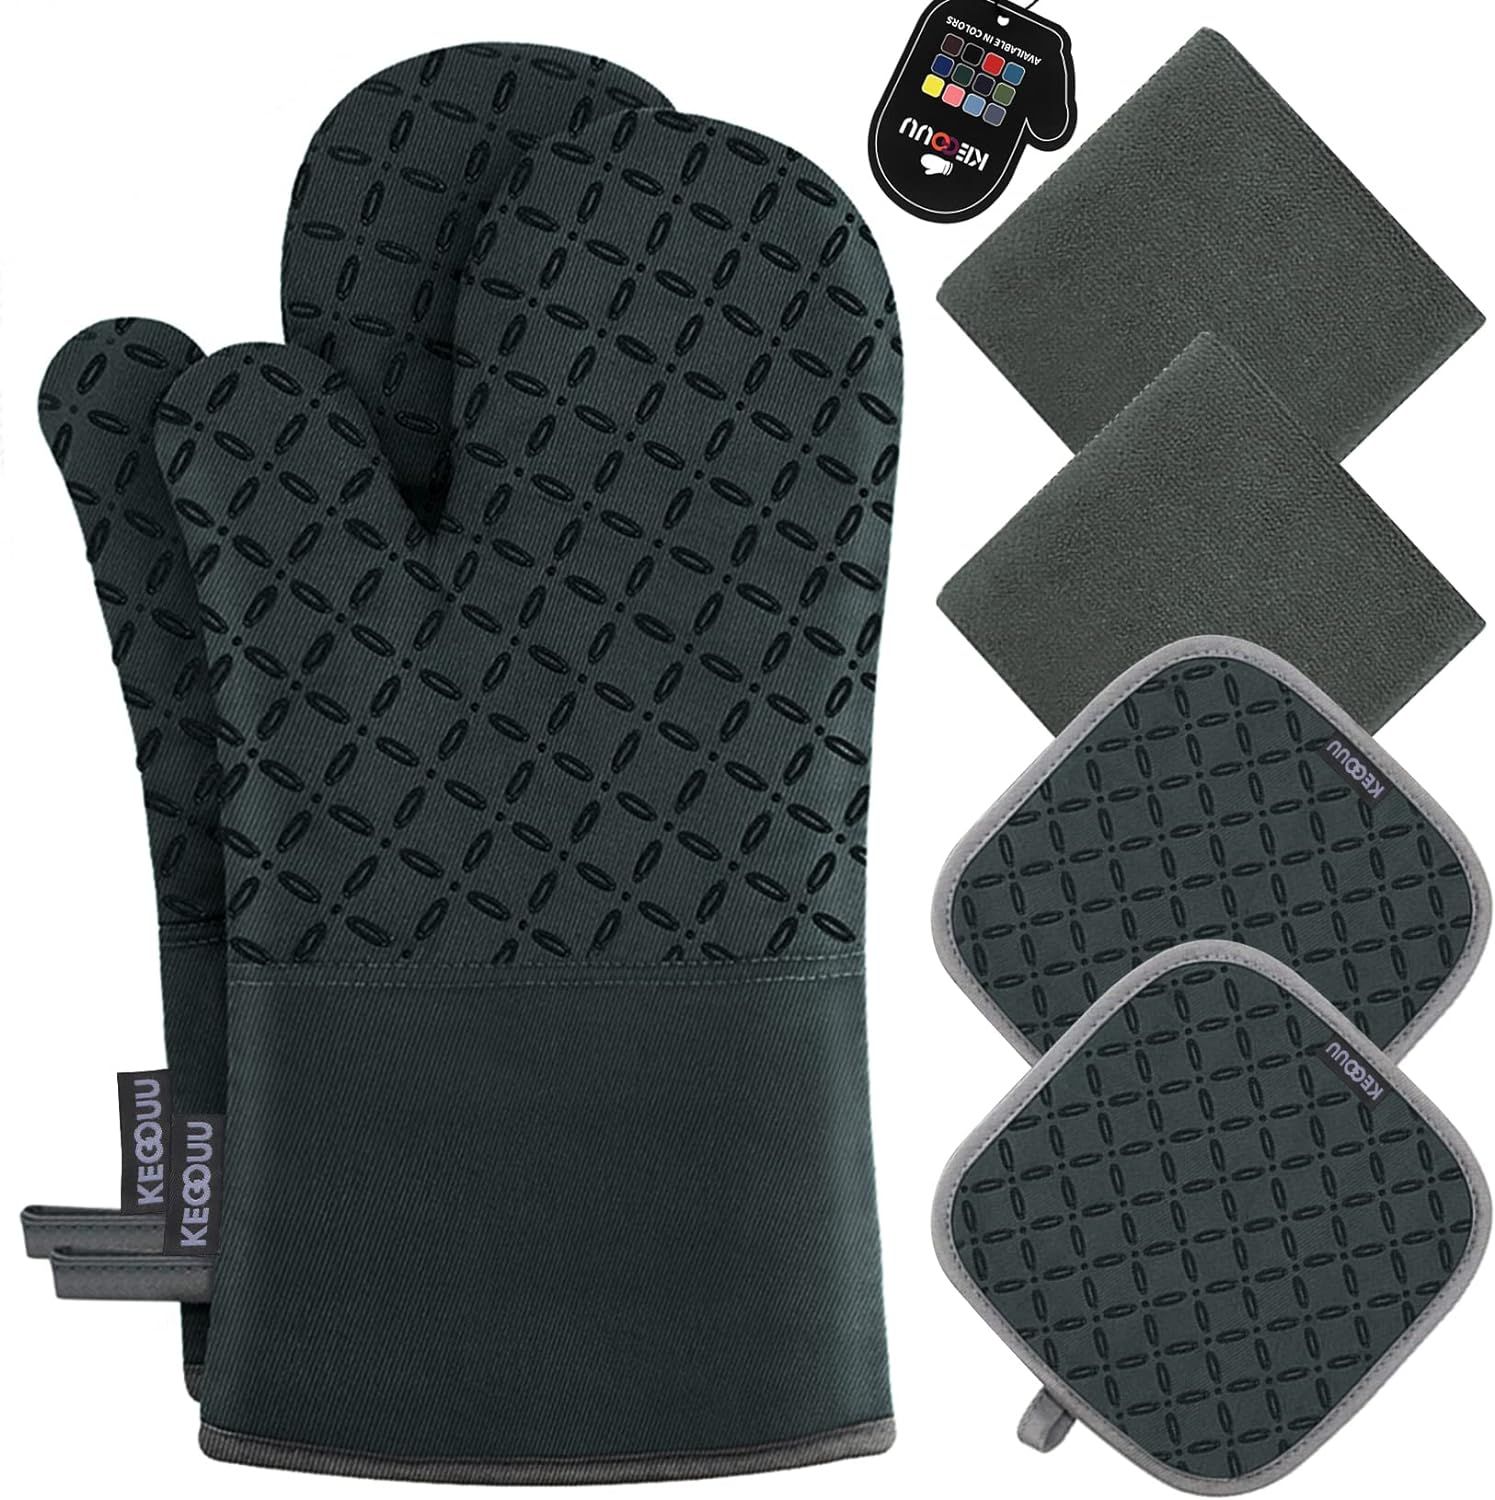 KEGOUU Oven Mitts and Pot Holders 6pcs Set, Kitchen Oven Glove High Heat Resistant 500 Degree Ext... | Amazon (US)